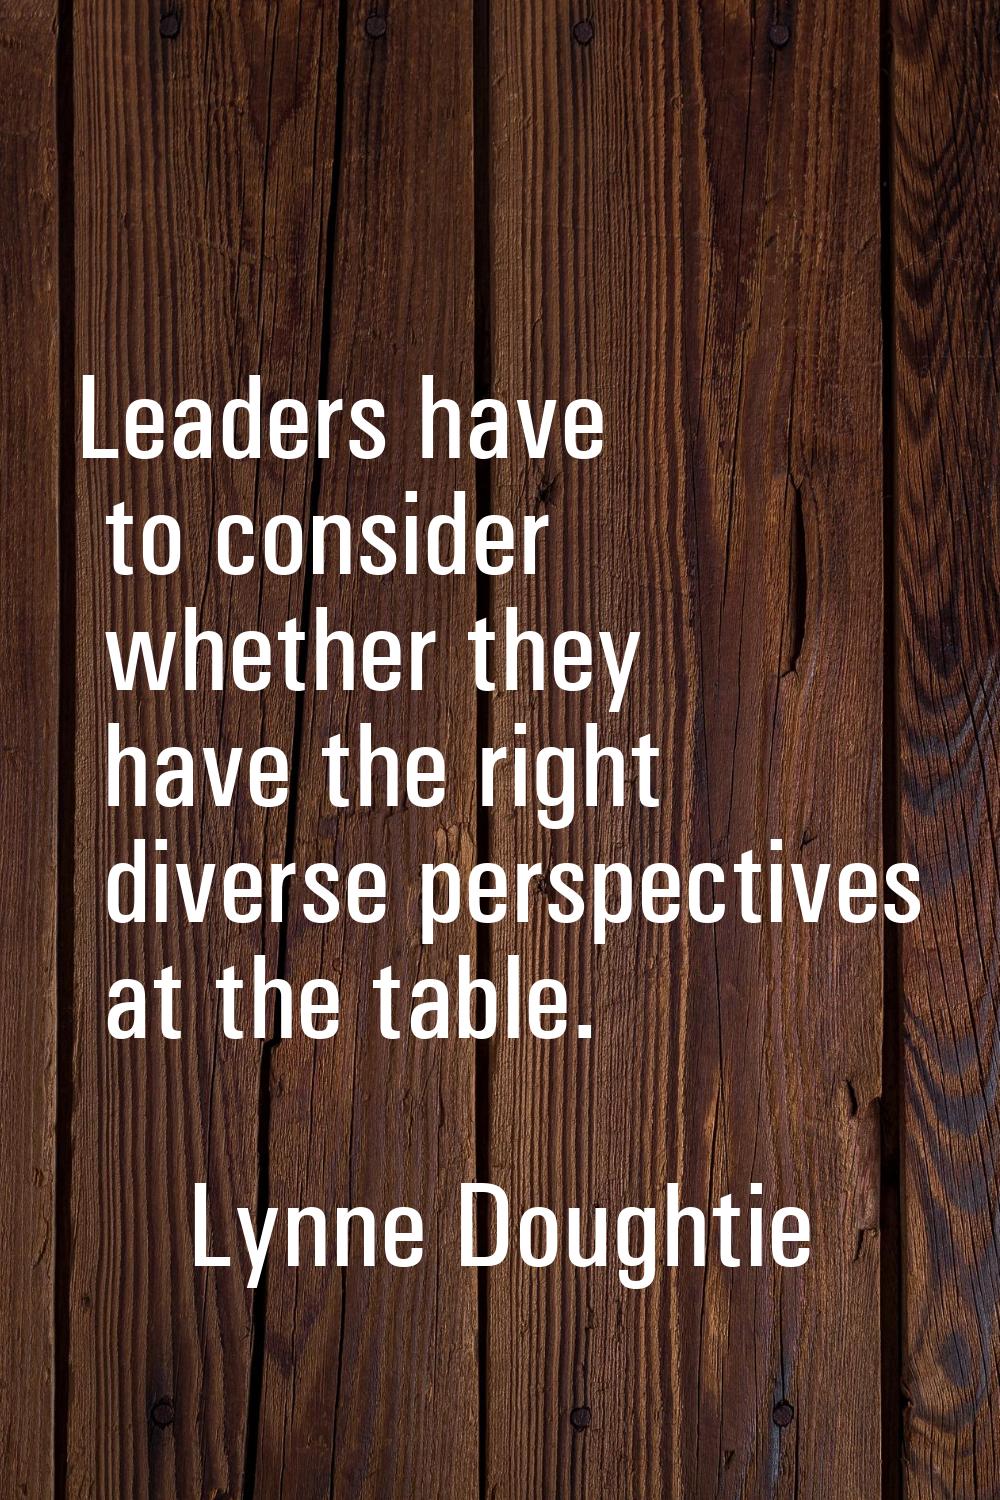 Leaders have to consider whether they have the right diverse perspectives at the table.